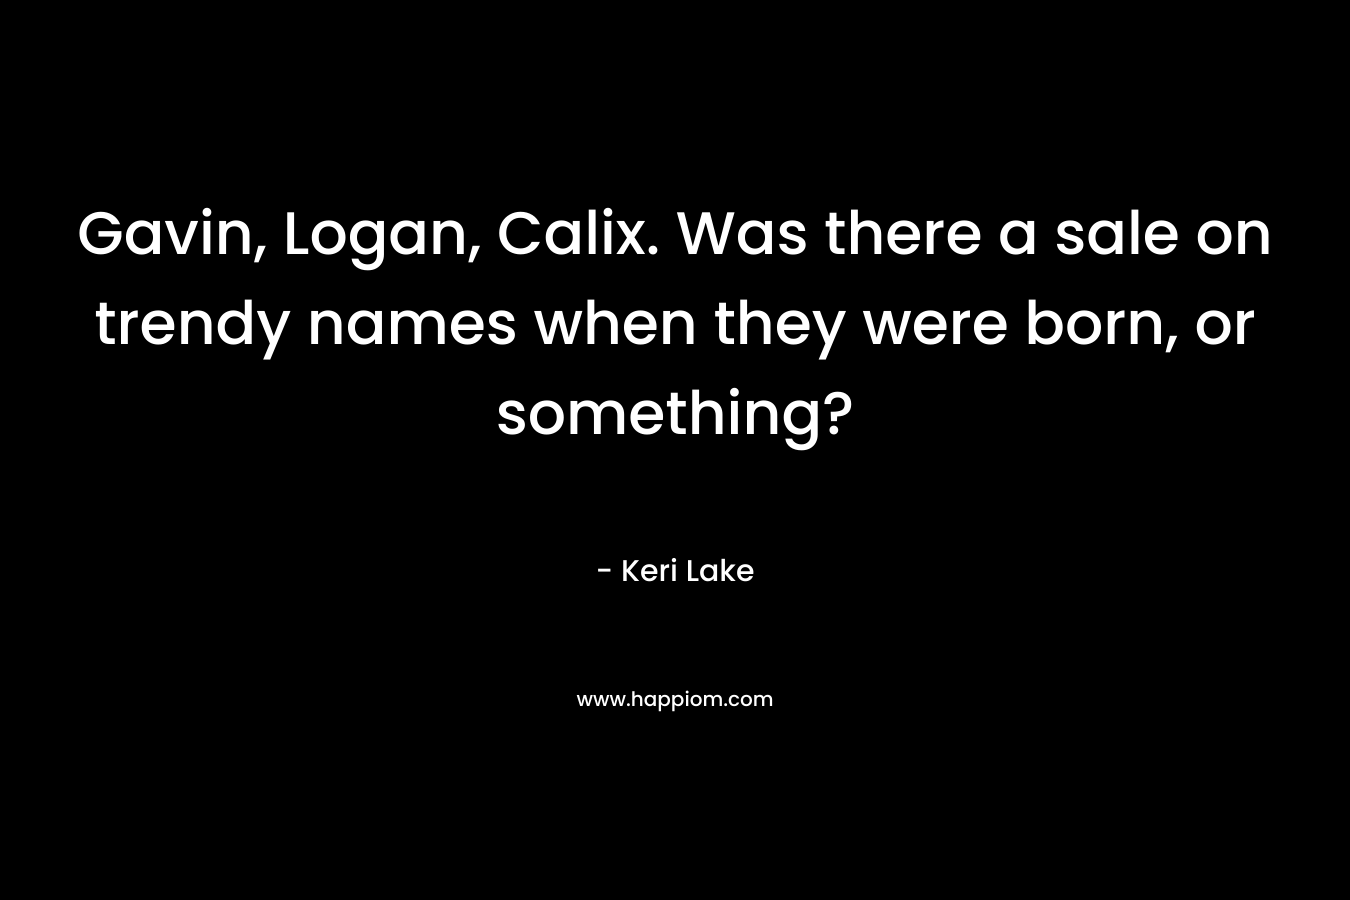 Gavin, Logan, Calix. Was there a sale on trendy names when they were born, or something? – Keri Lake